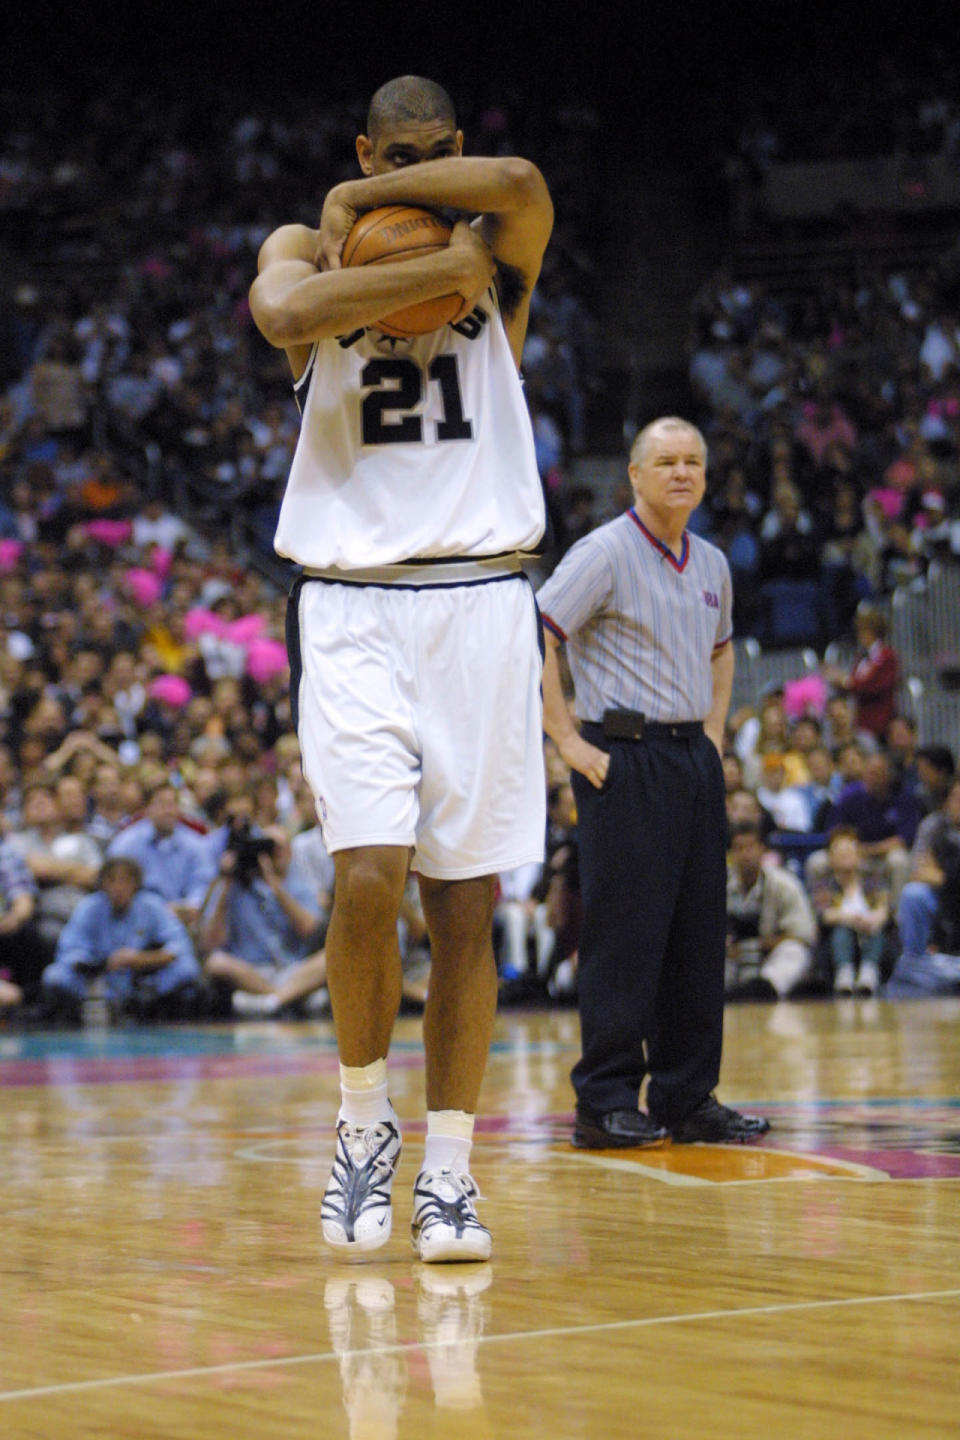 <p>2001: Tim Duncan #21 of the San Antonio Spurs during game two of round one of the NBA playoffs against the Minnesota Timberwolves at the Alamodome in San Antonio, Texas. The Spurs won 86-69. DIGITAL IMAGE. Mandatory Credit: Ronald Martinez/Allsport<br></p>